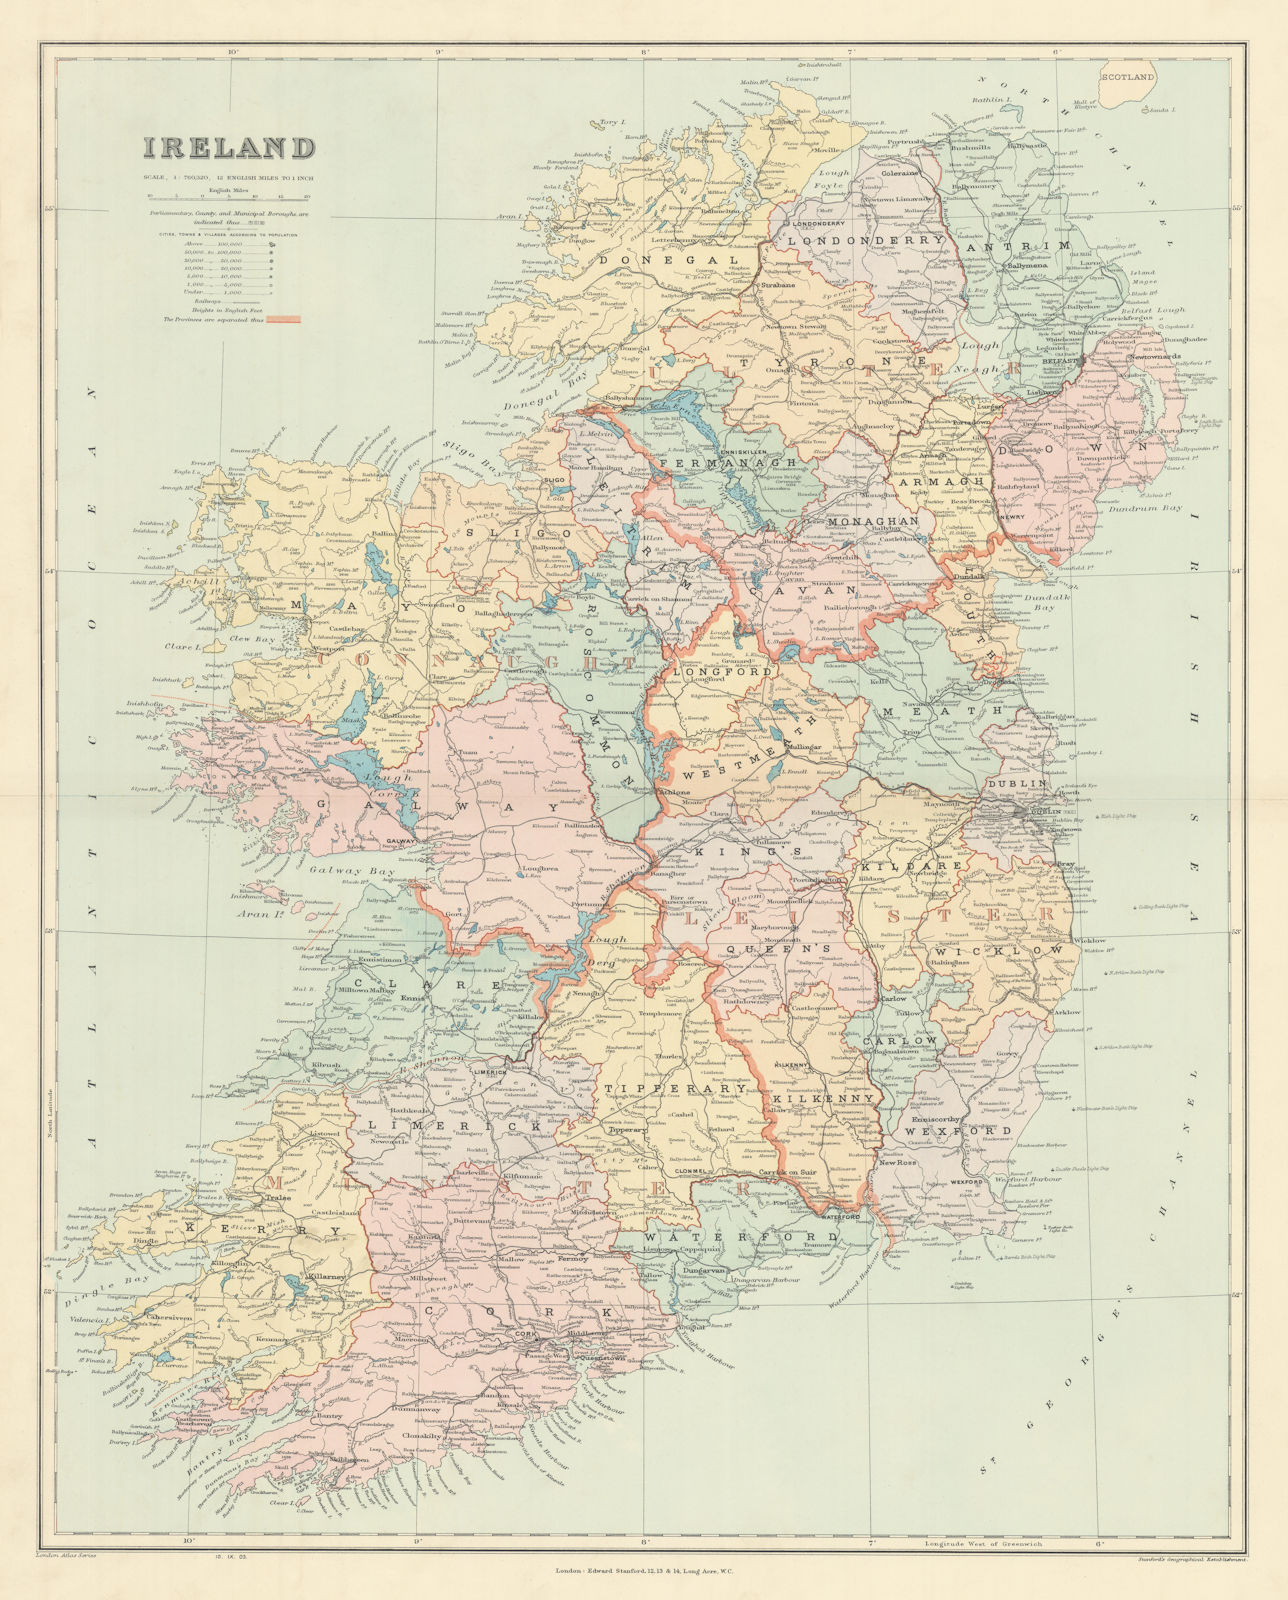 Ireland. Counties, railways & provinces. Large 64x52cm. STANFORD 1904 old map